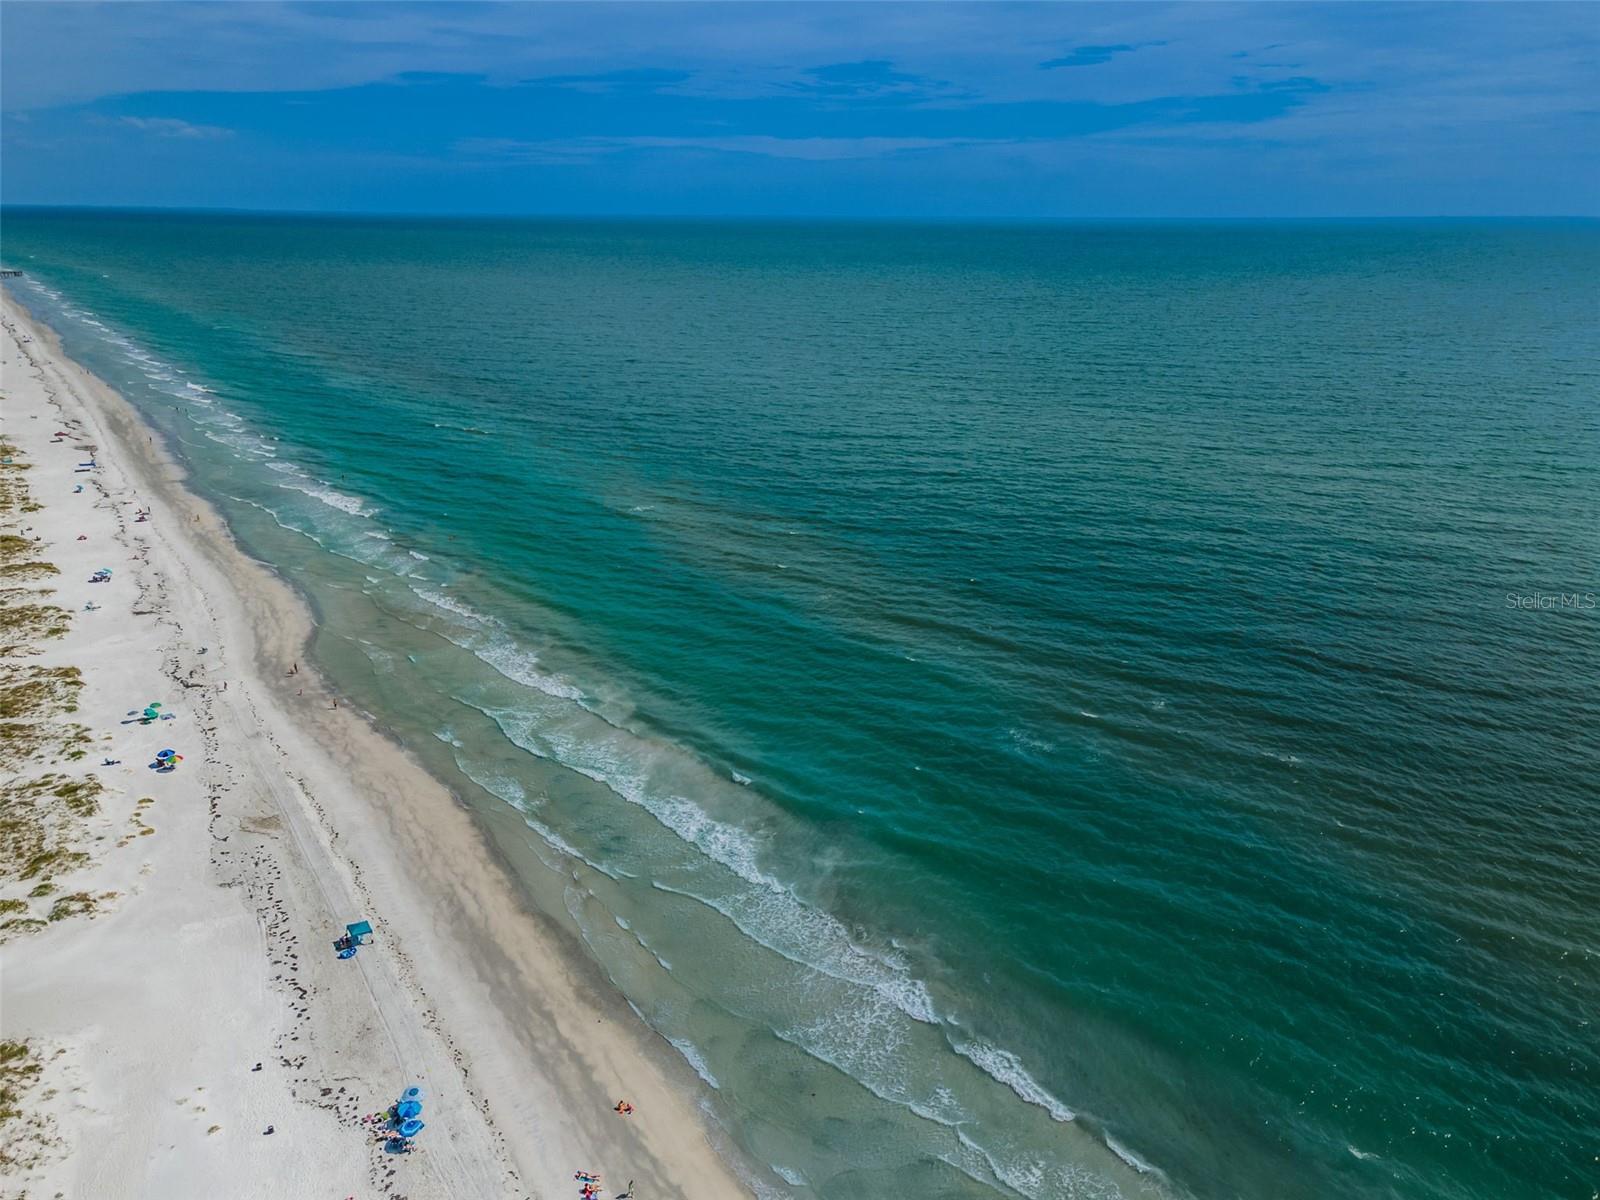 The sandy beaches of the Gulf of Mexico across the street